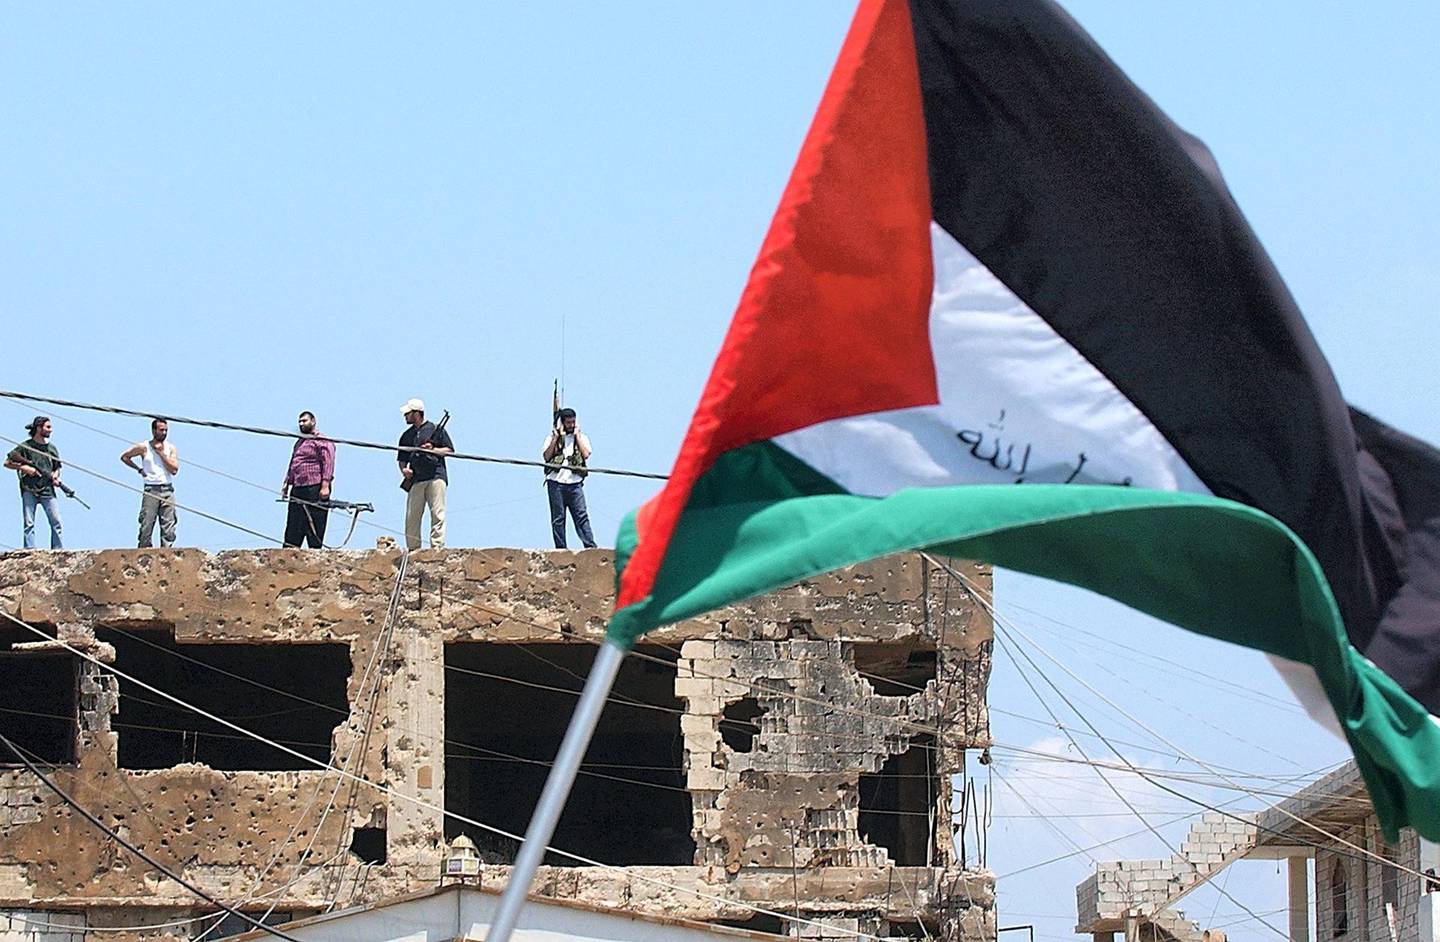 A Palestinian flag is waved during a rally to protest the Israeli incursion into Gaza, as armed Palestinian militants stand guard atop a damaged building, in the Burj-el-Barajneh Palestinian refugee camp, in the suburbs of Beirut, Lebanon, Friday, June 30, 2006. Following Friday prayers, Palestinians from different refugee camps in Lebanon staged sit-in protests condemning the Israeli incursion into Gaza and demanded world action to protect the Palestinians. (AP Photo/Jean Haddad)